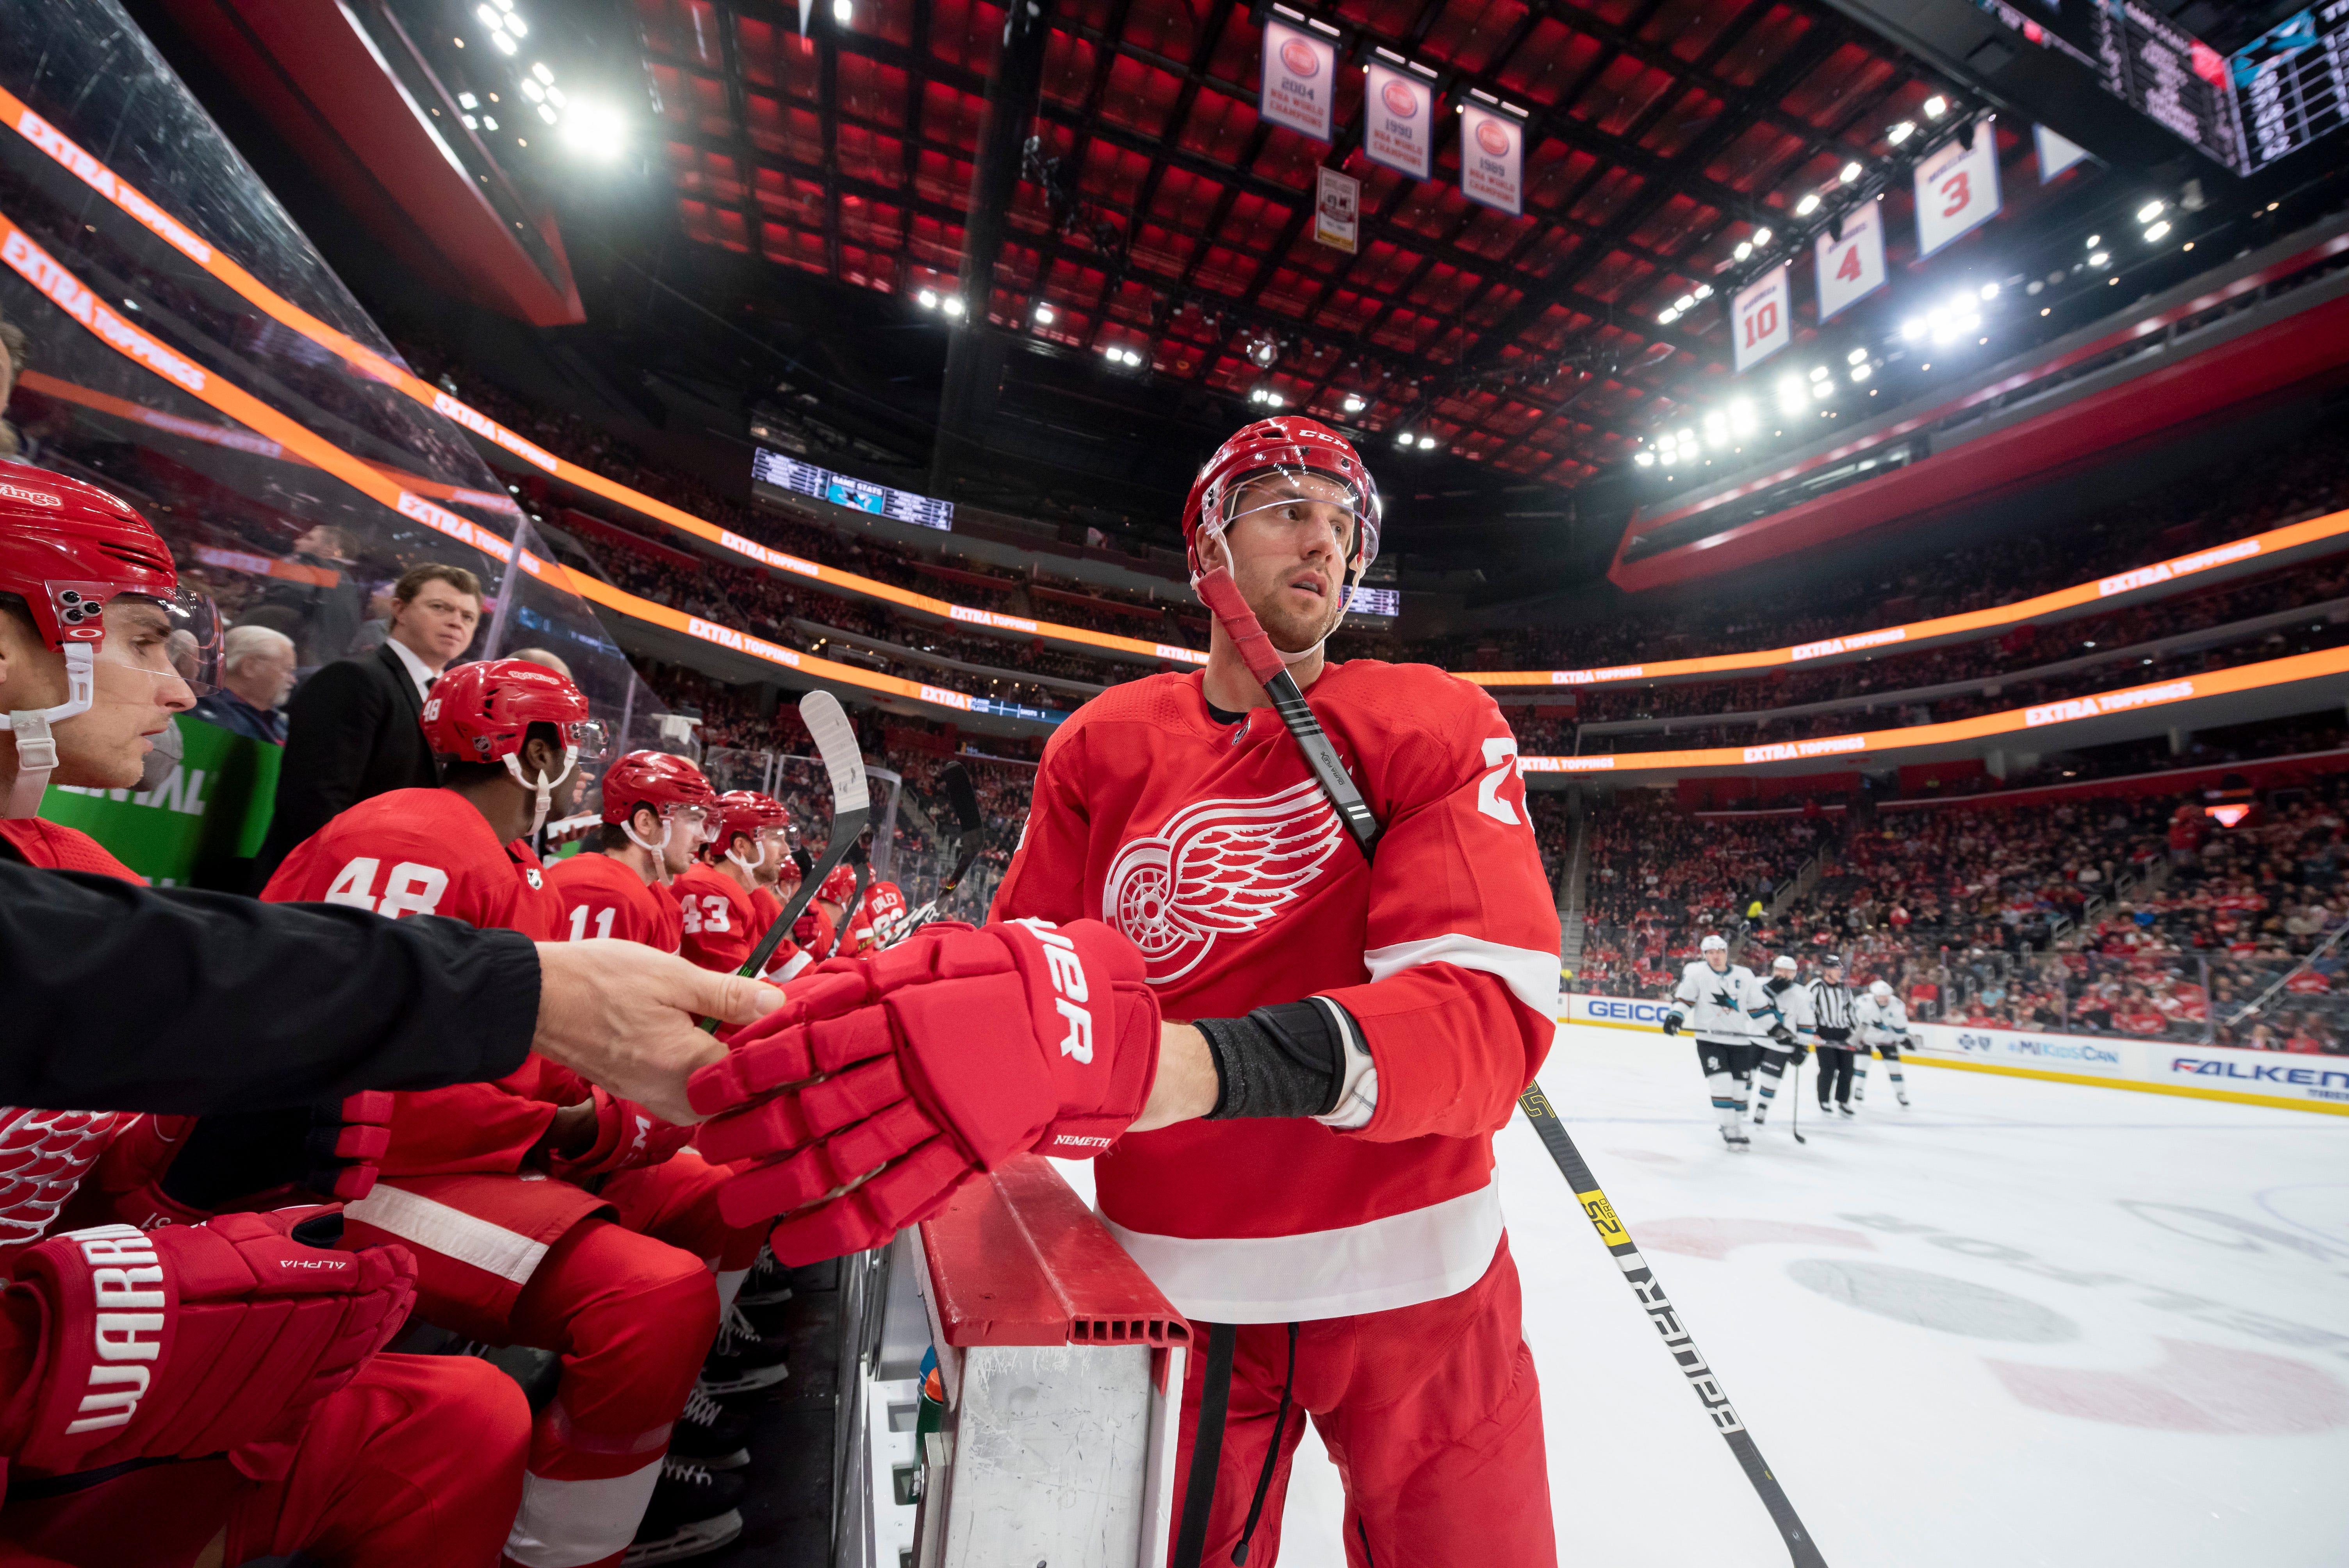 Patrik Nemeth – AGE: 28. CONTRACT: Ends 2021, $3 million per: STATS: 64 games, 1 goal, 8 assists. COMMENT: A defensive defenseman who did the job the Wings wanted from him, Nemeth provided a veteran presence on a thin position group. Could the Wings extend him next season? GRADE: C-plus.